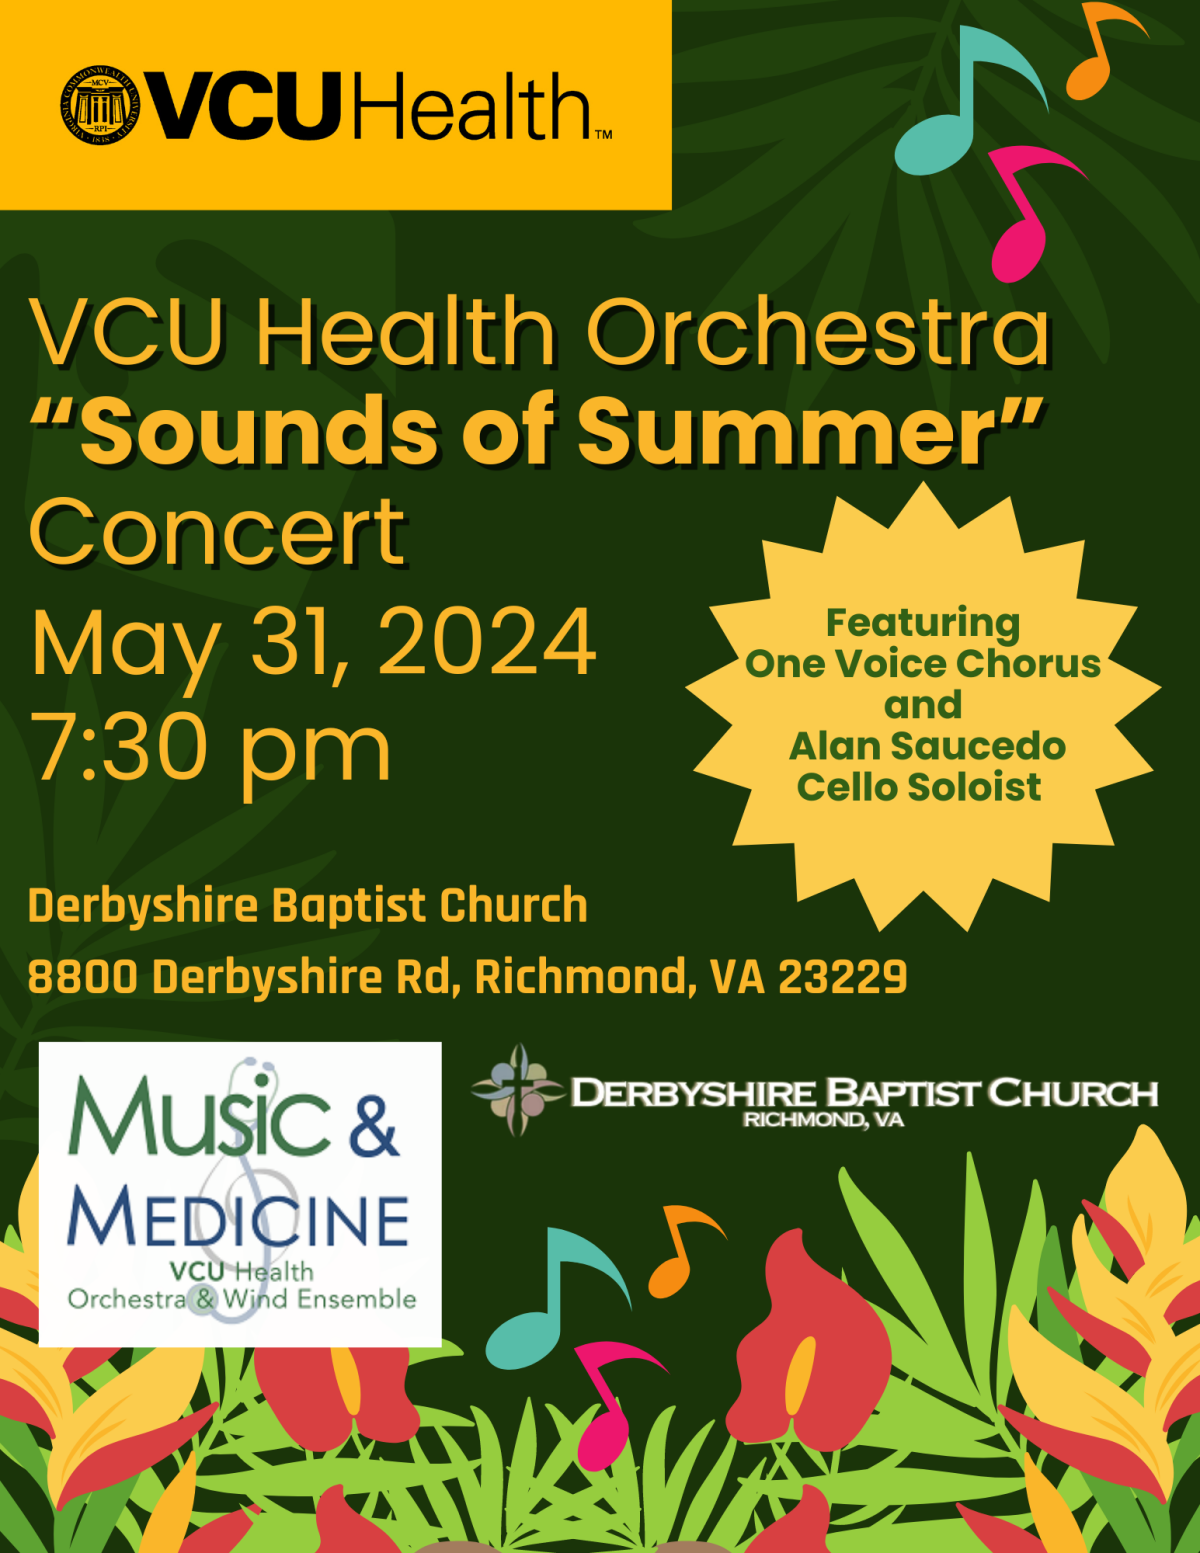 VCU Health Orchestra - Sounds of Summer Concert!